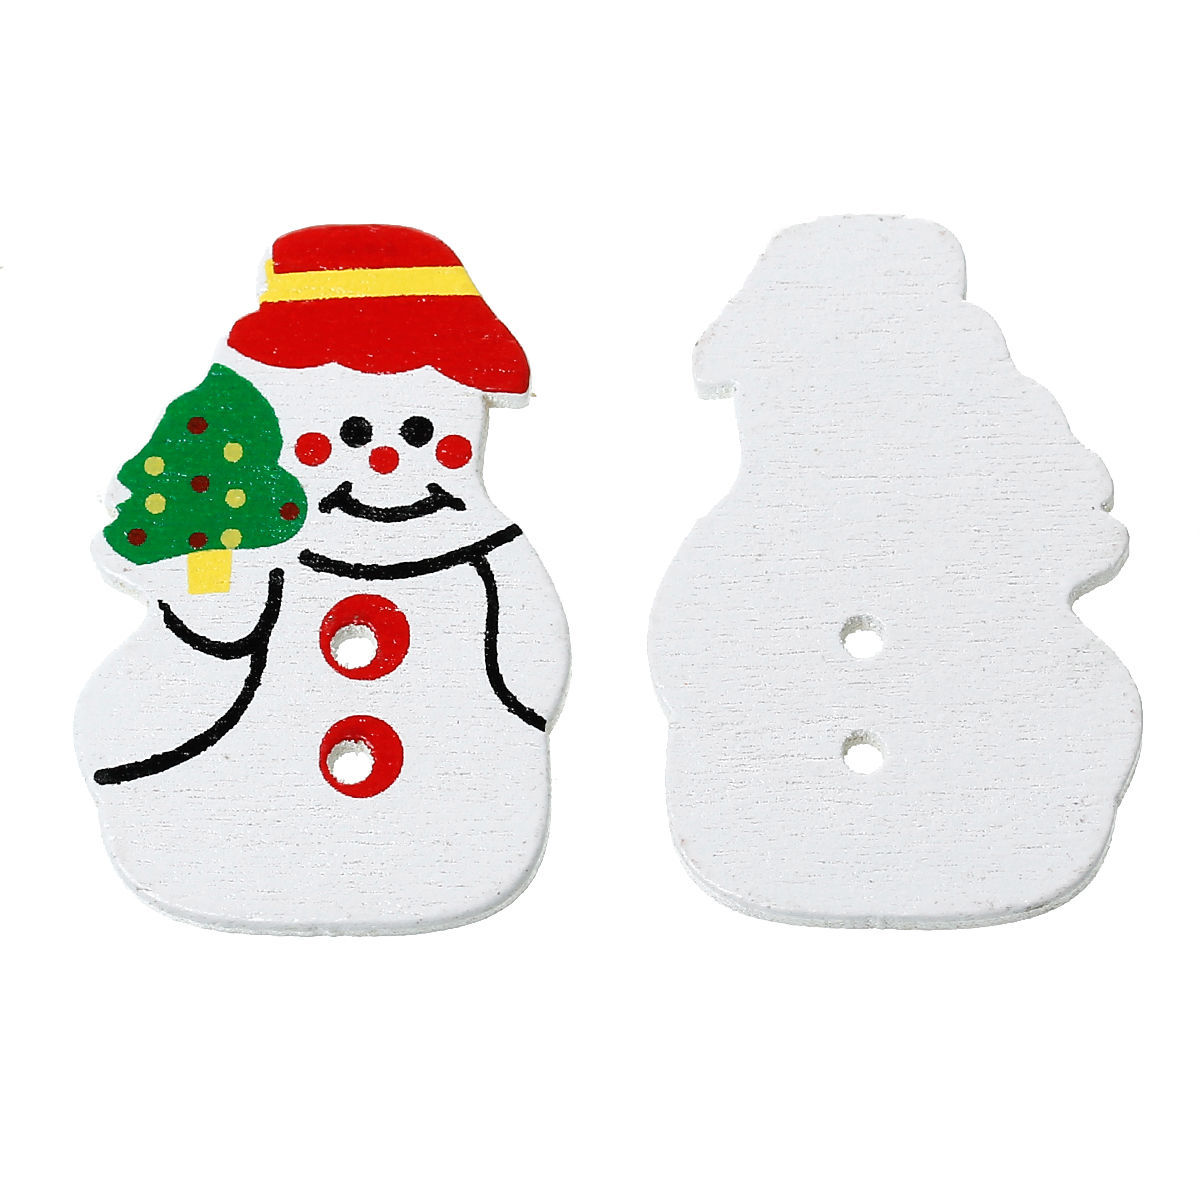 Picture of Wood Sewing Buttons Scrapbooking 2 Holes Christmas Snowman White 36mm(1 3/8") x 24mm(1"), 5 PCs